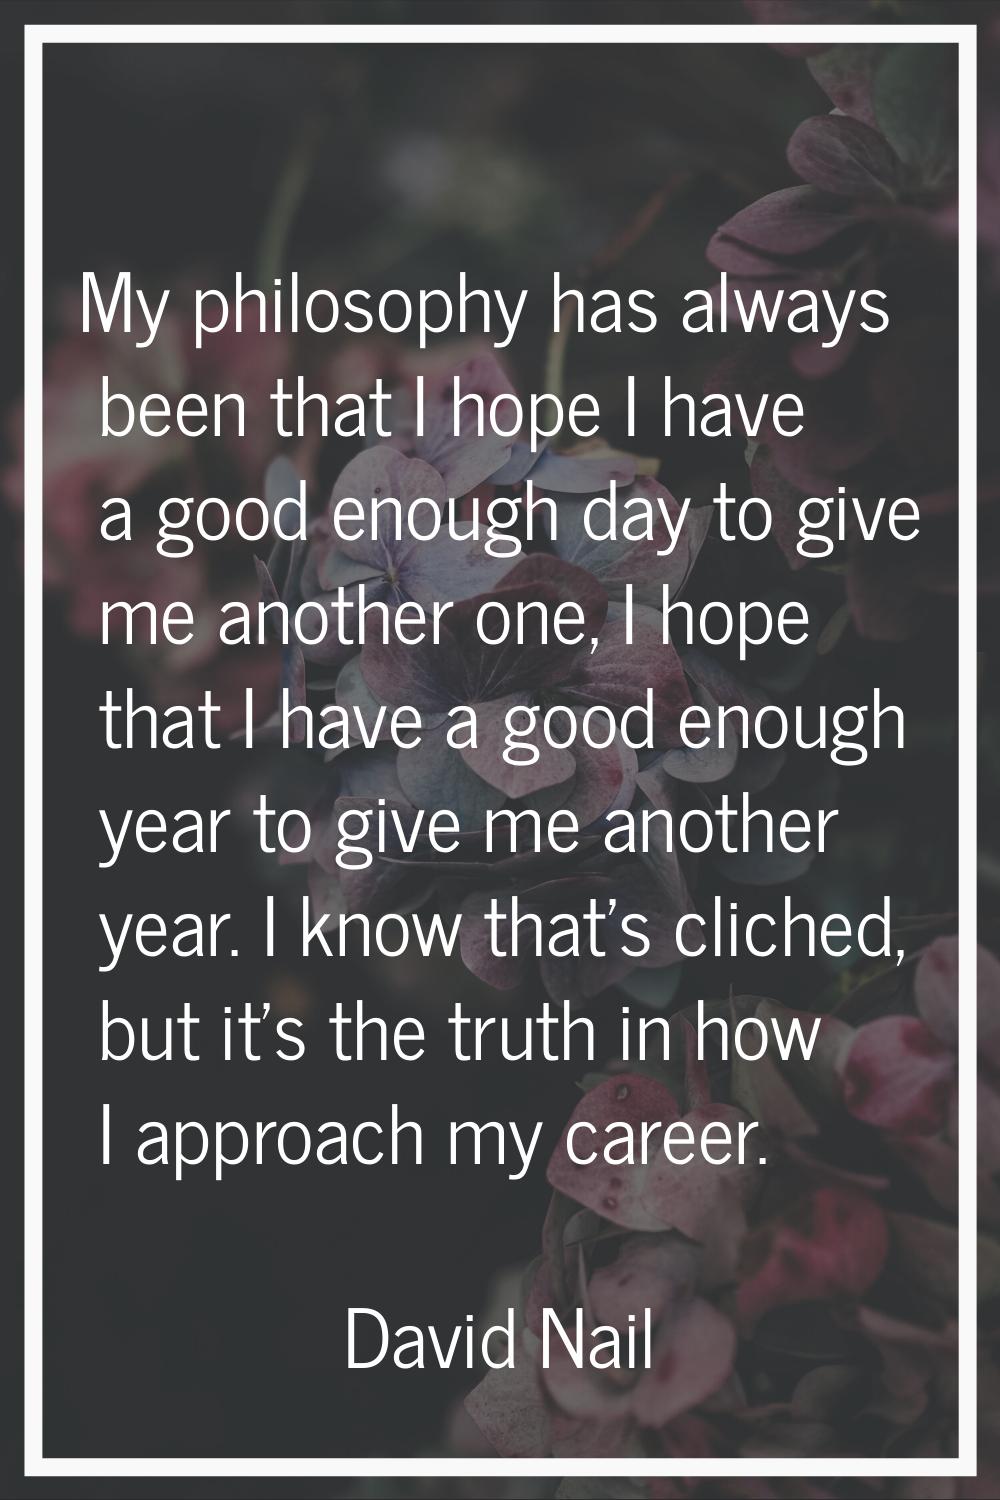 My philosophy has always been that I hope I have a good enough day to give me another one, I hope t